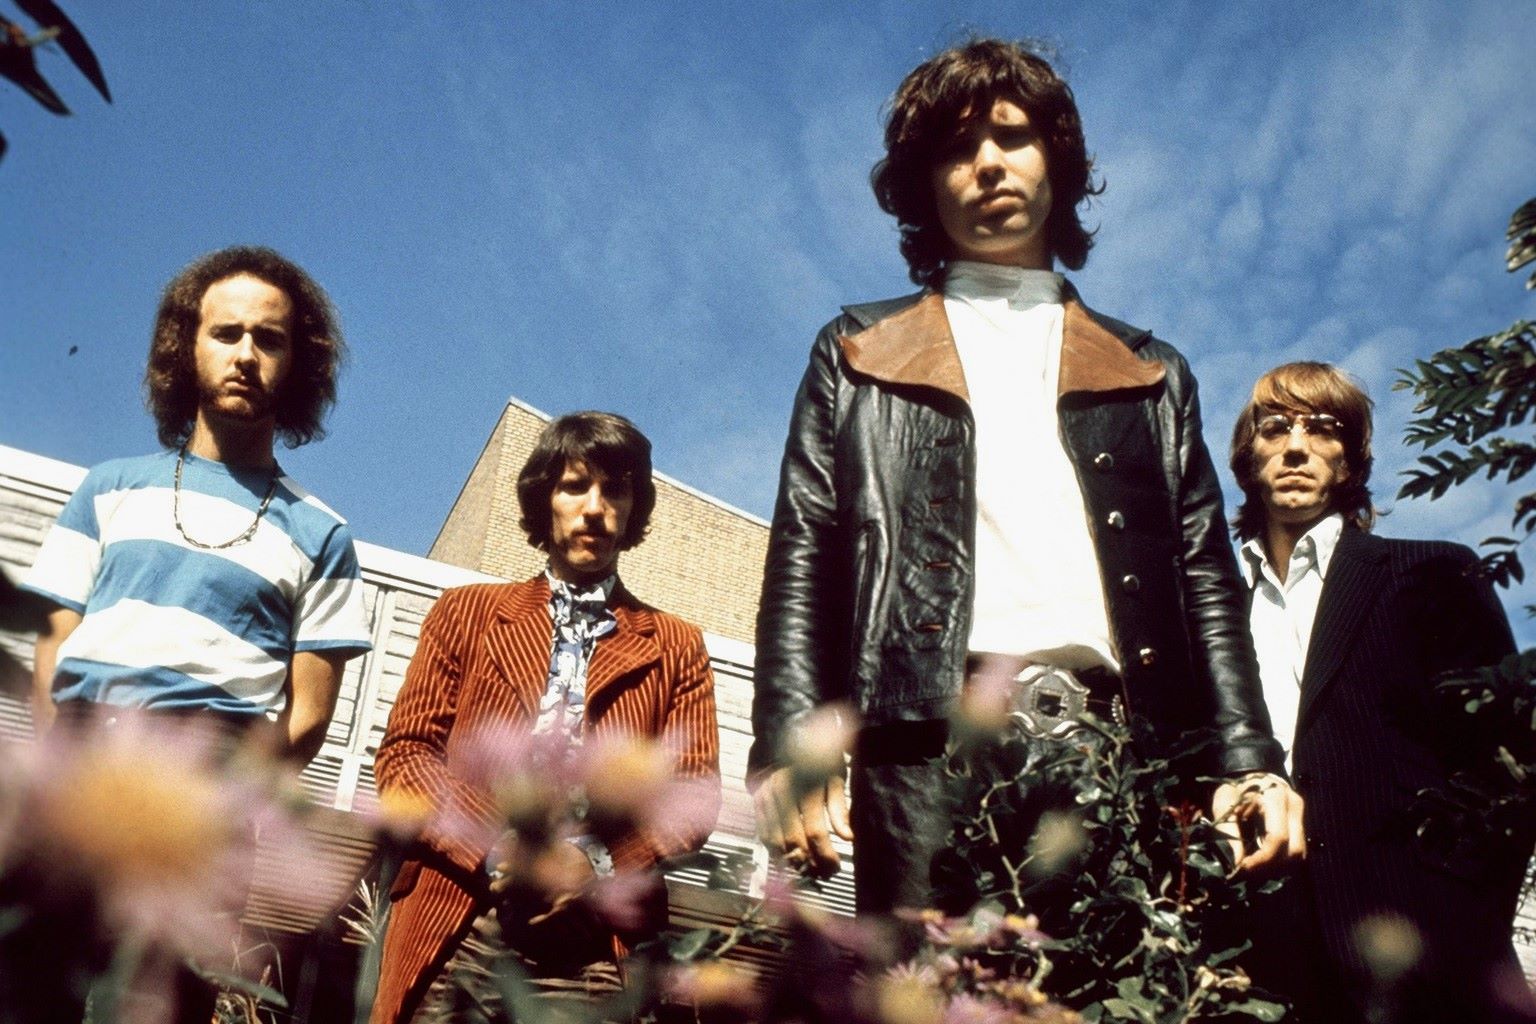 The Mysterious Phrase In The Doors’ “Touch Me” Revealed! You Won’t Believe Its Meaning!